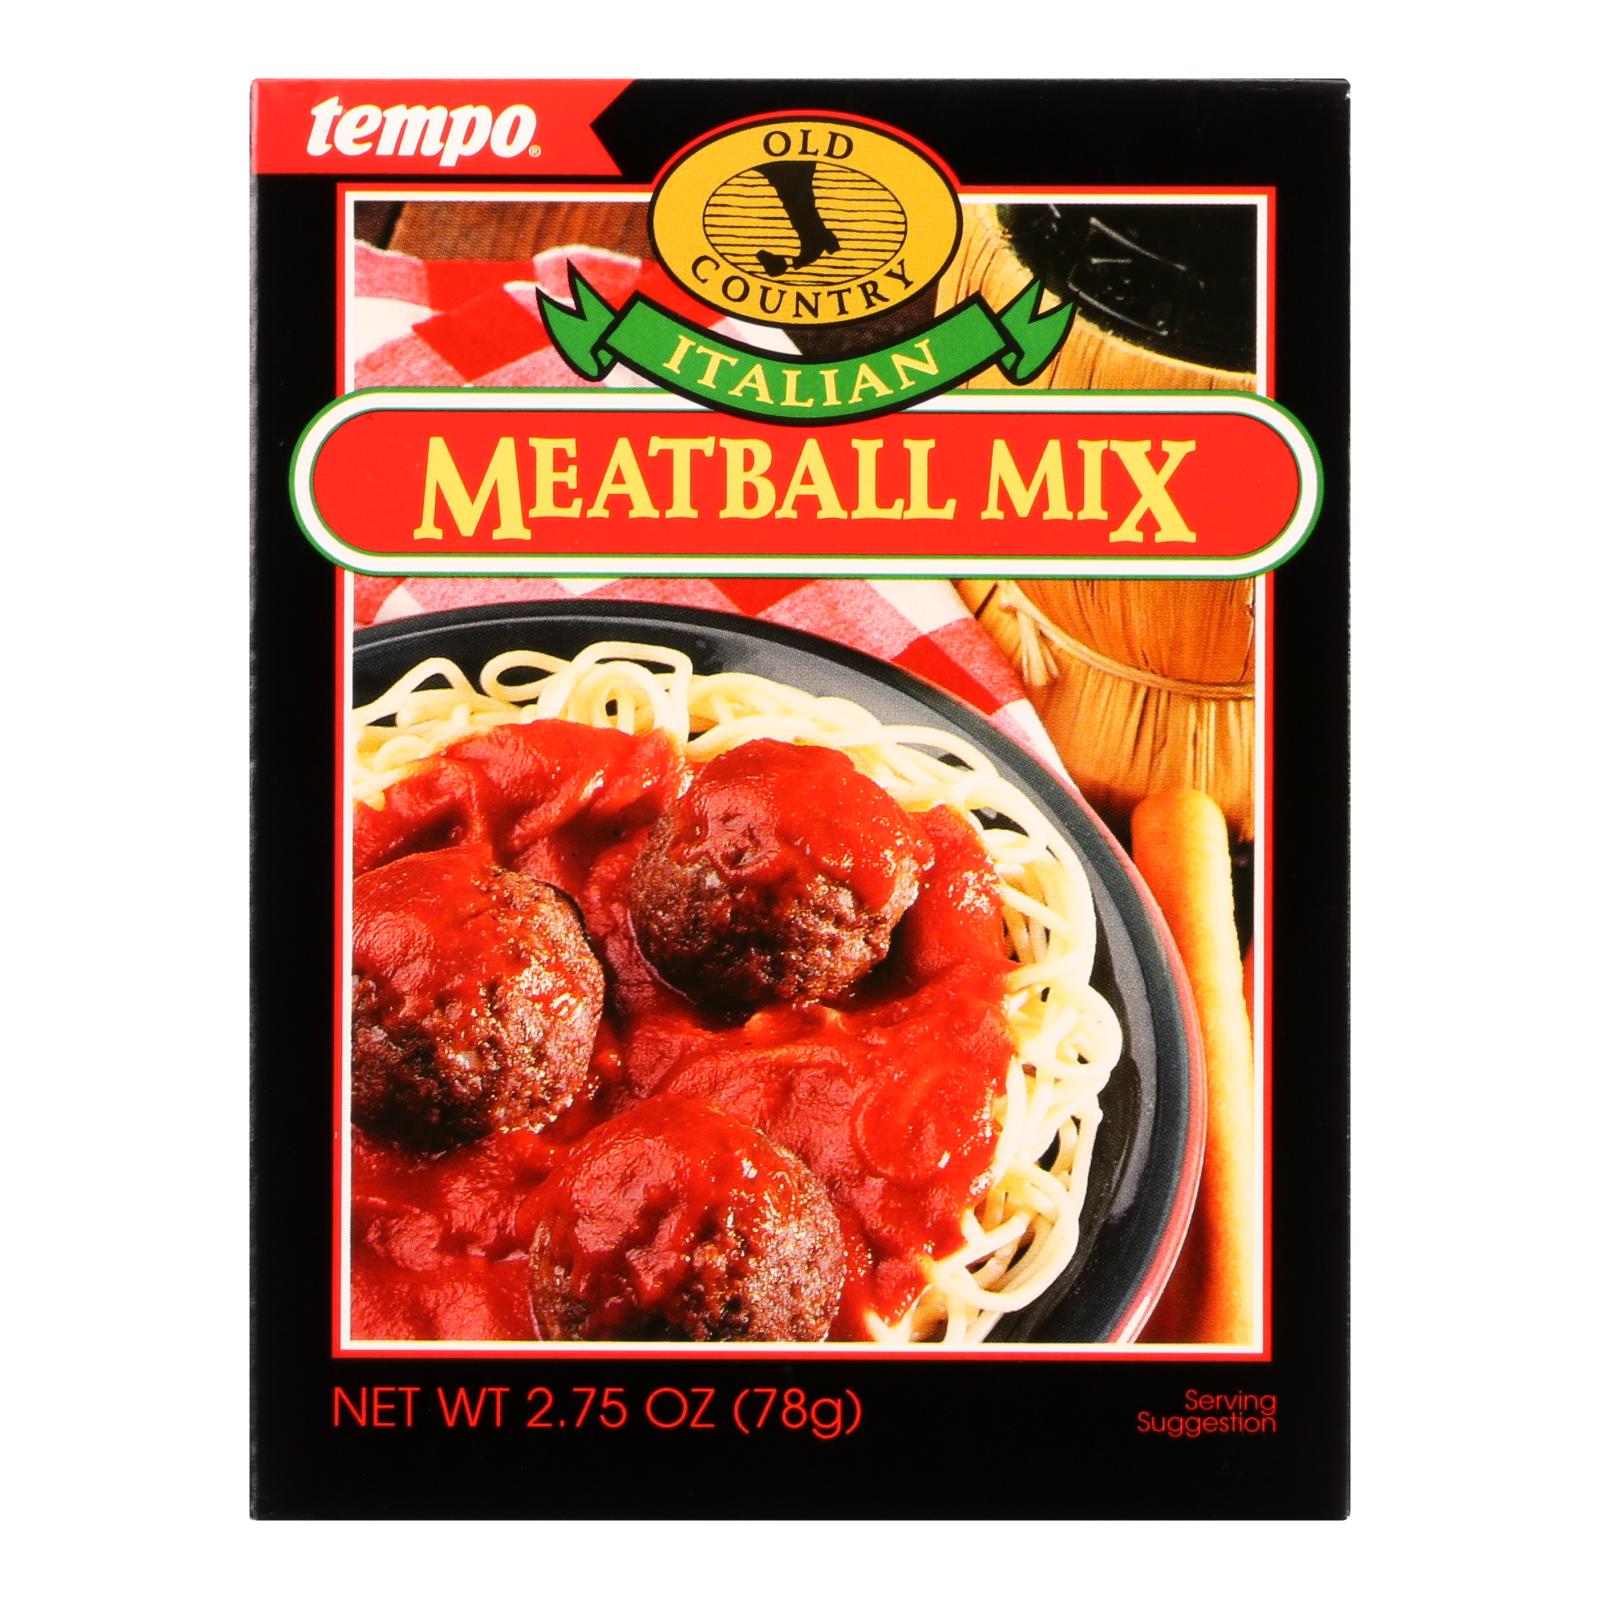 Tempo Old Country Meatball Mix - Italian - 2.75 Oz - Case Of 12 - Whole Green Foods